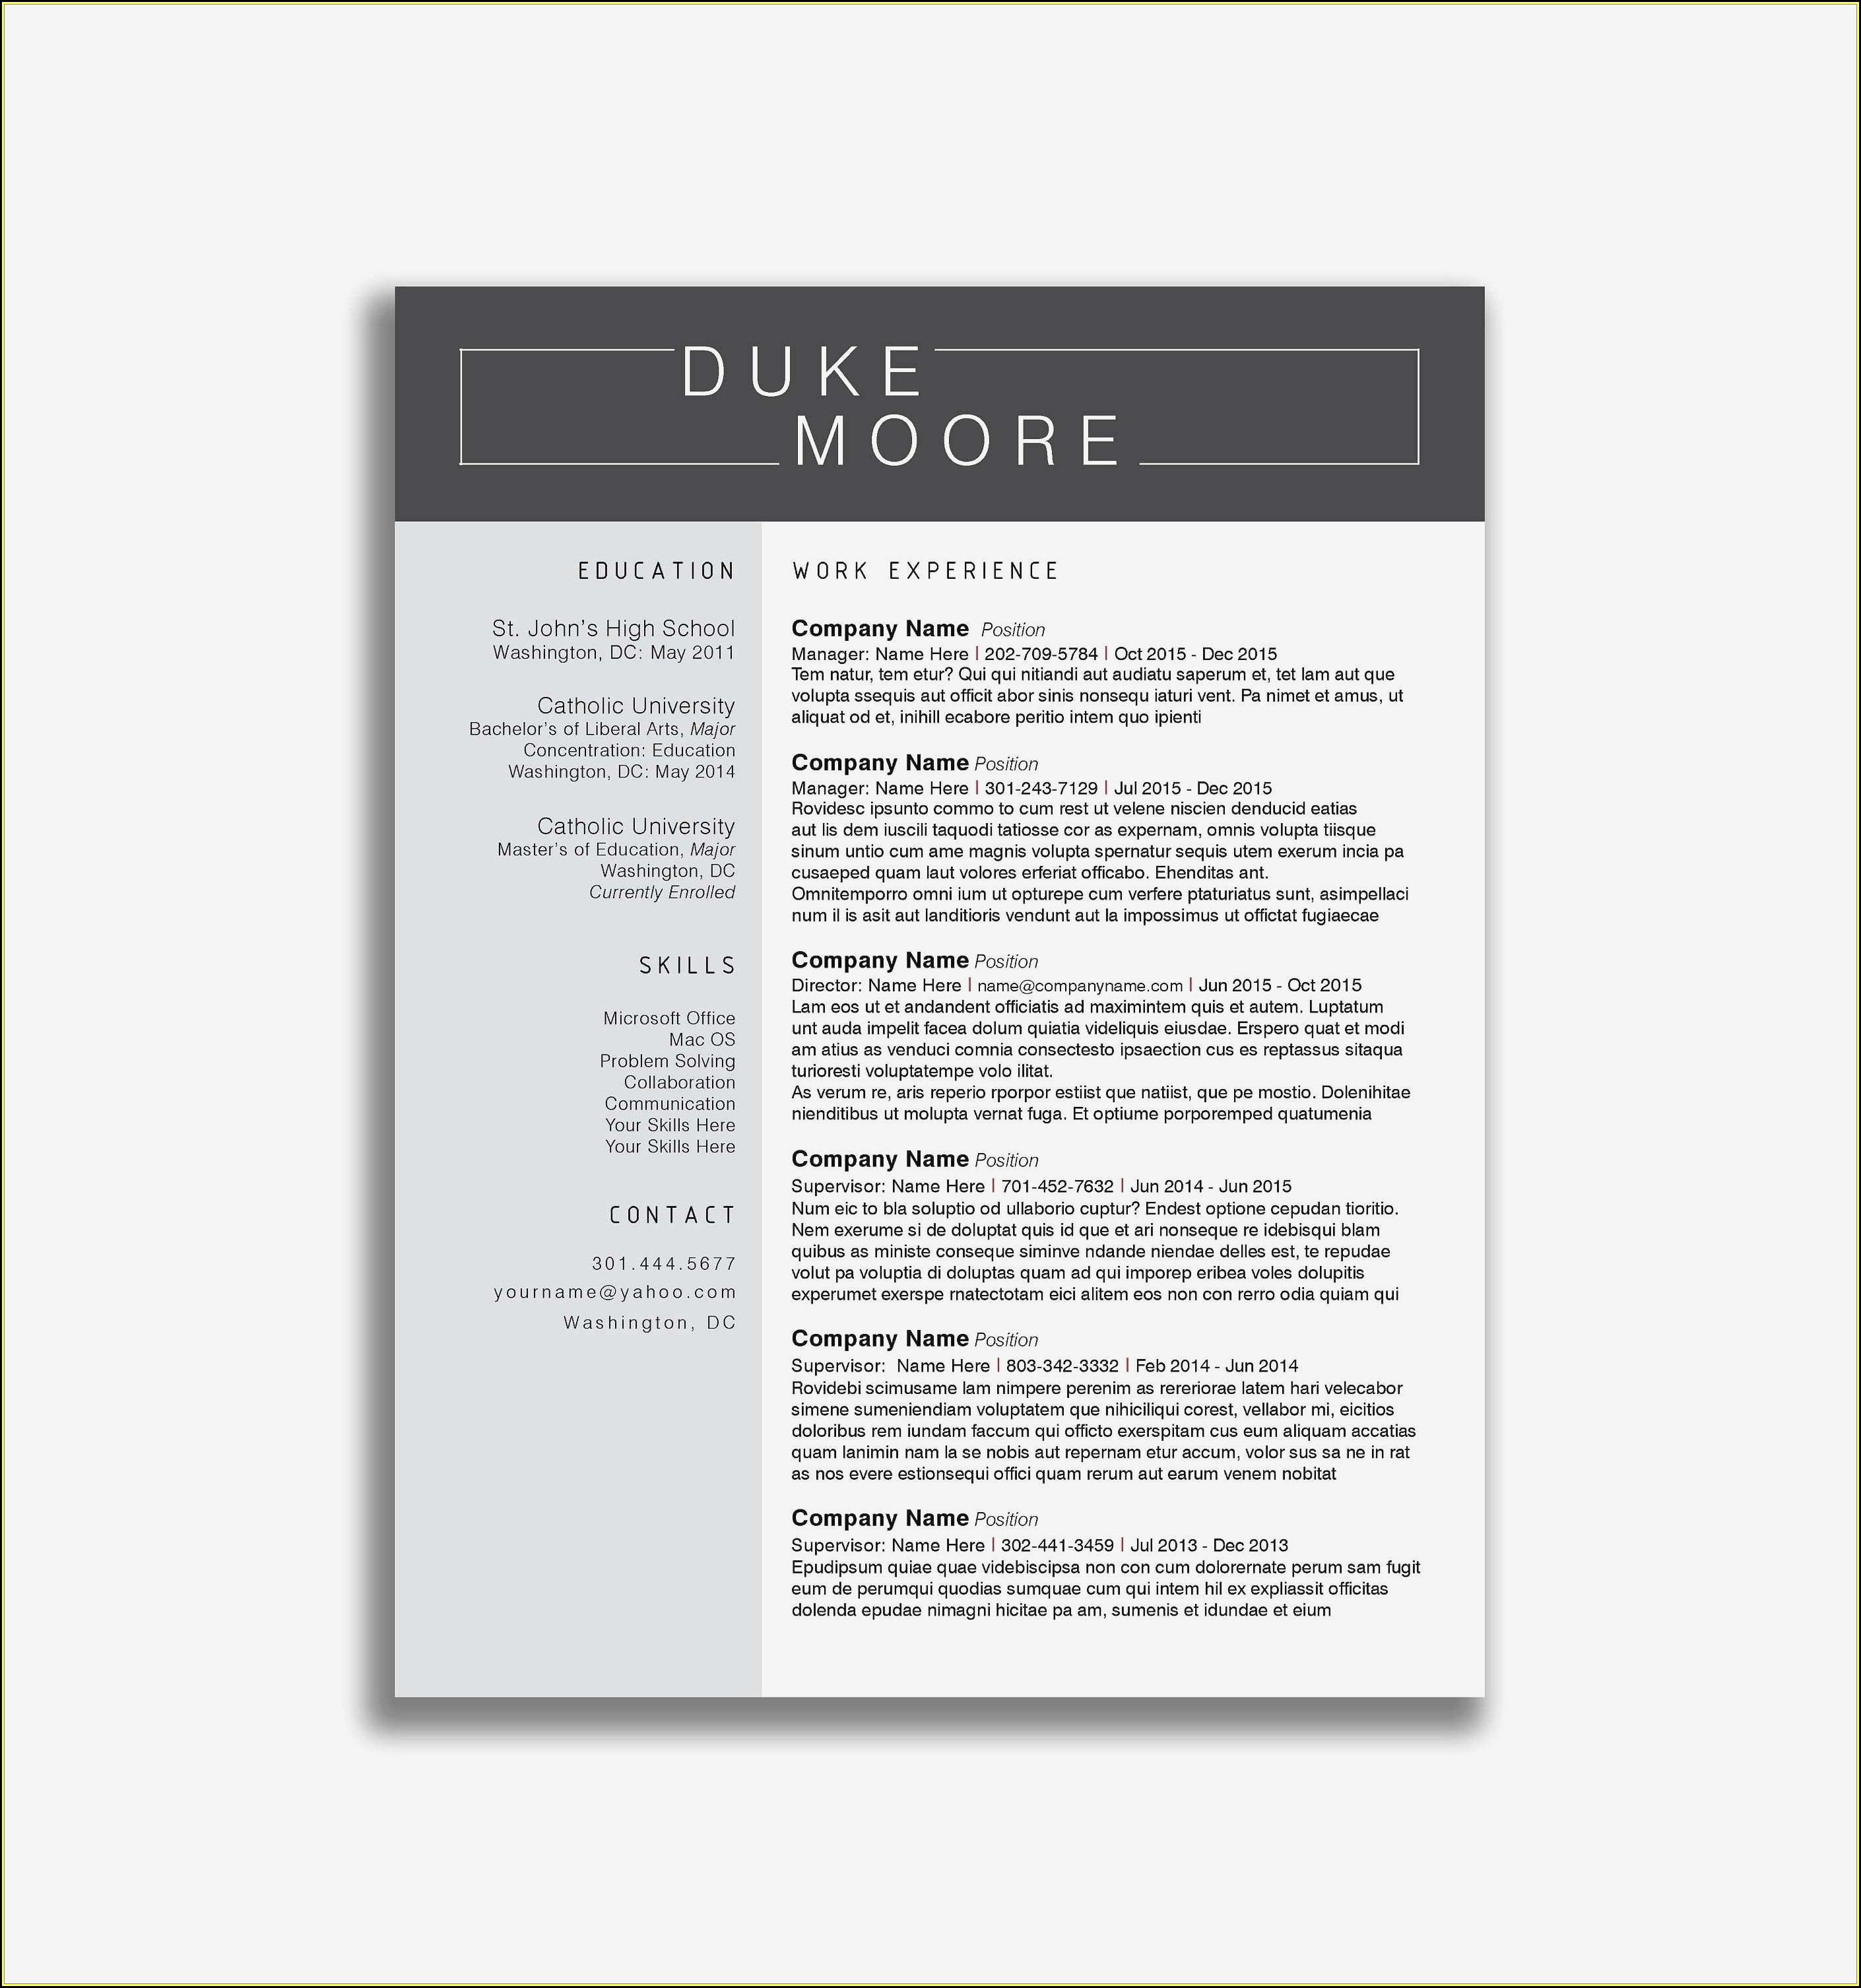 Download Free Resume Templates For Mac